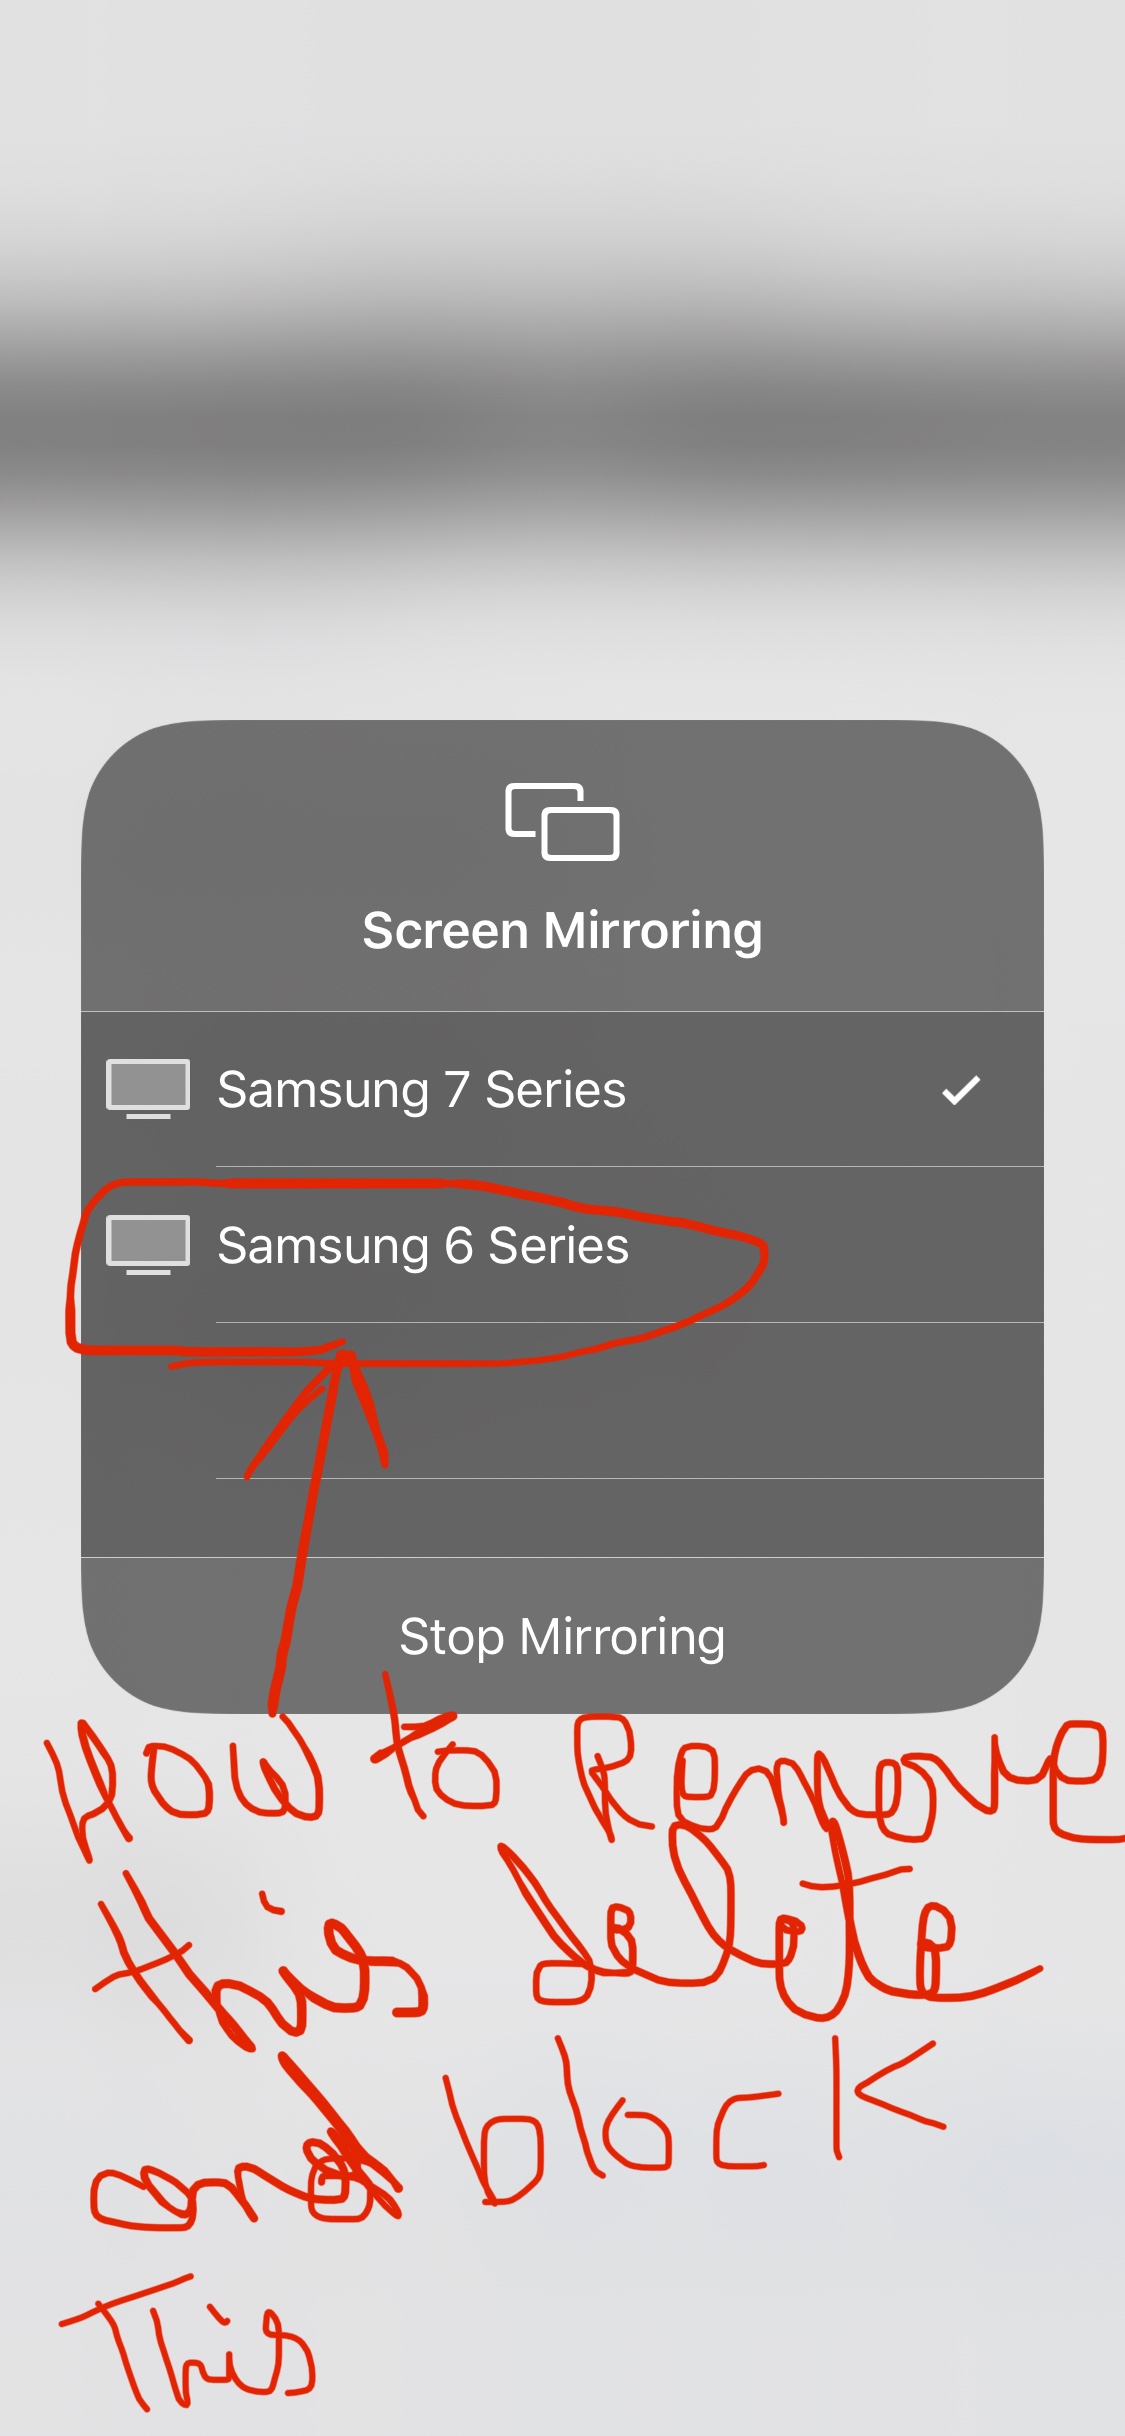 How To Remove Samsung Tv From Iphone, How To Get My Iphone Screen Mirror Samsung Tv